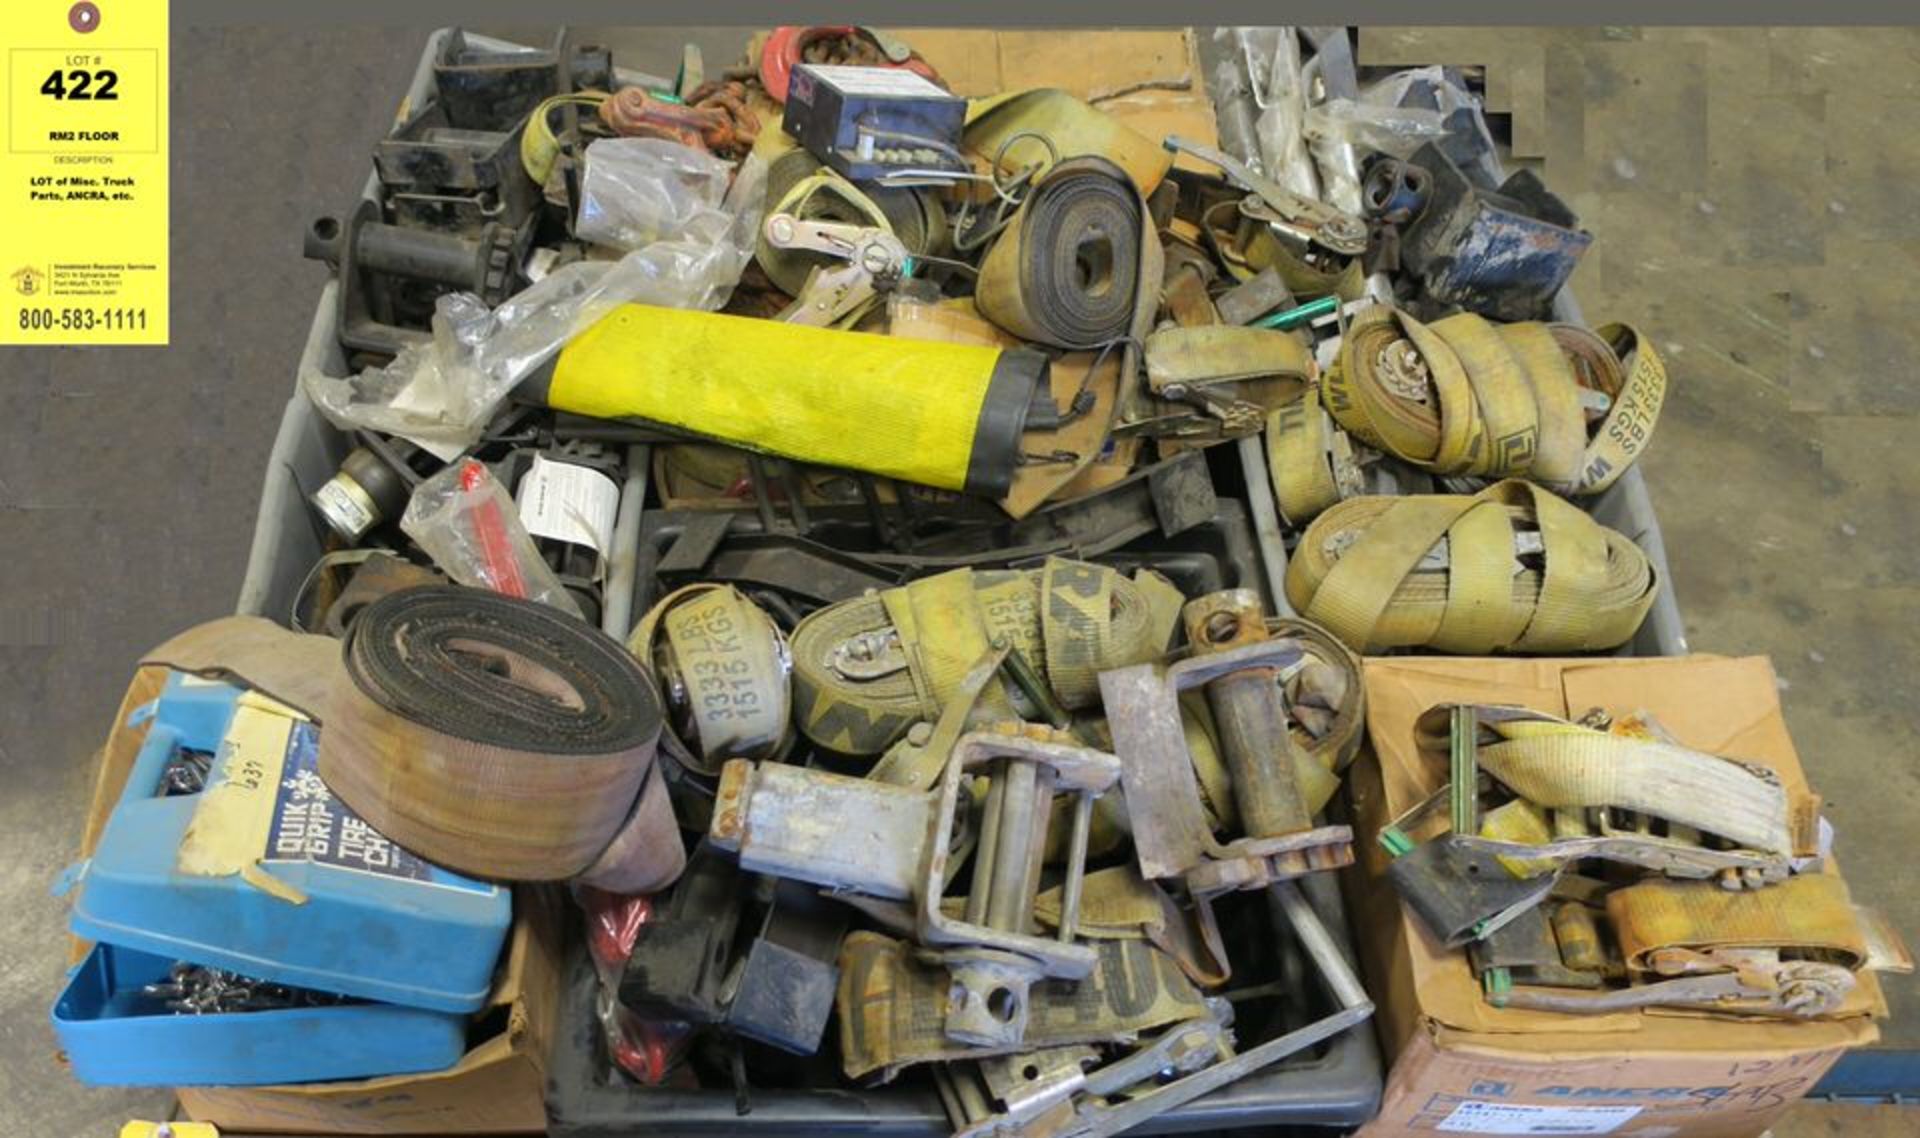 LOT of Misc. Truck Parts, ANCRA, etc.